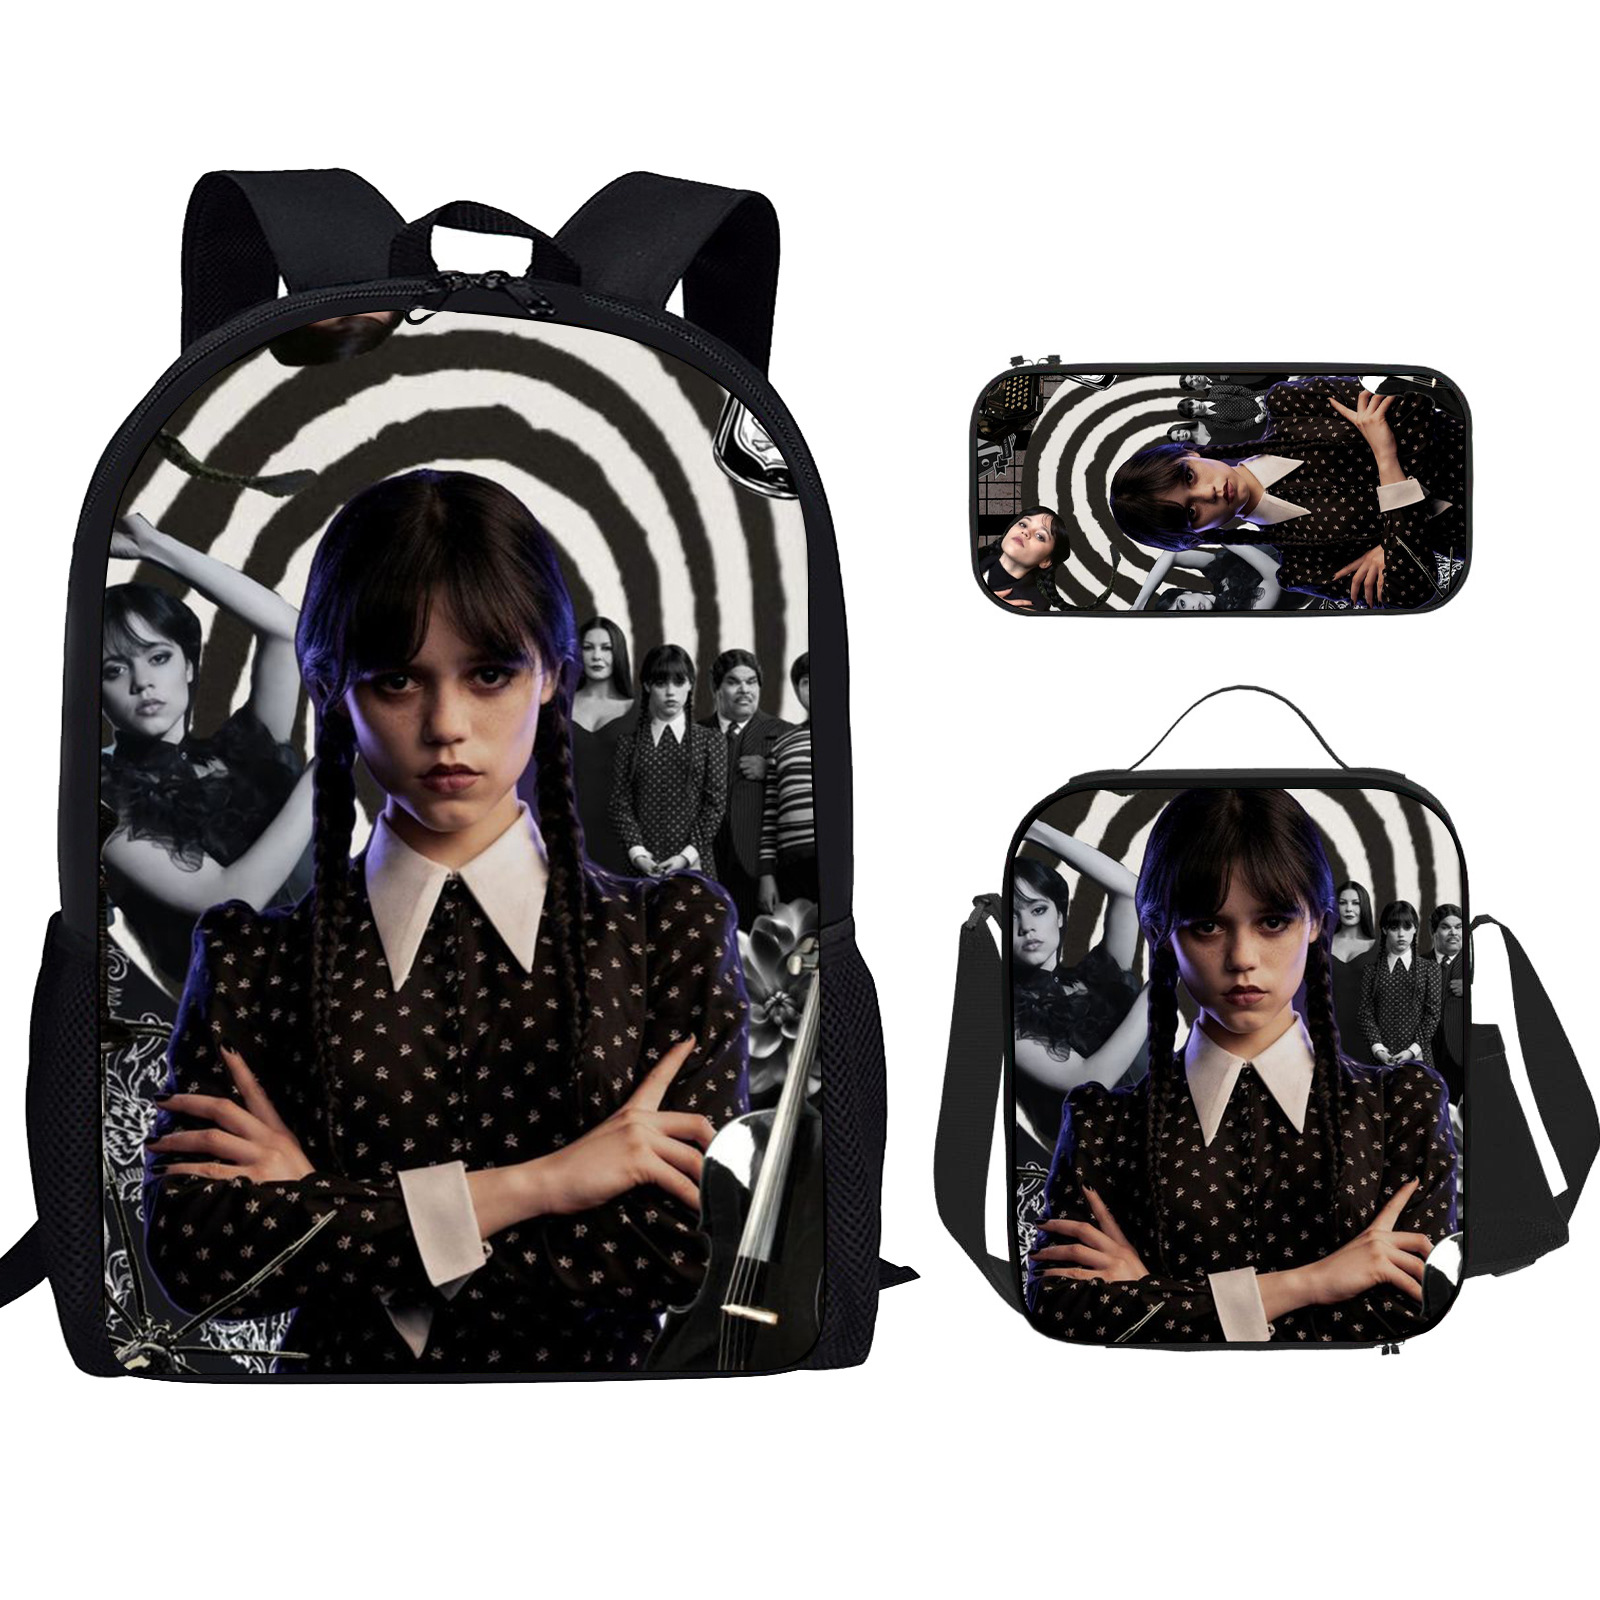 New Adams Wednesday School Bag Three-Piece Nylon High Quality Printing Student Backpack Children Backpack